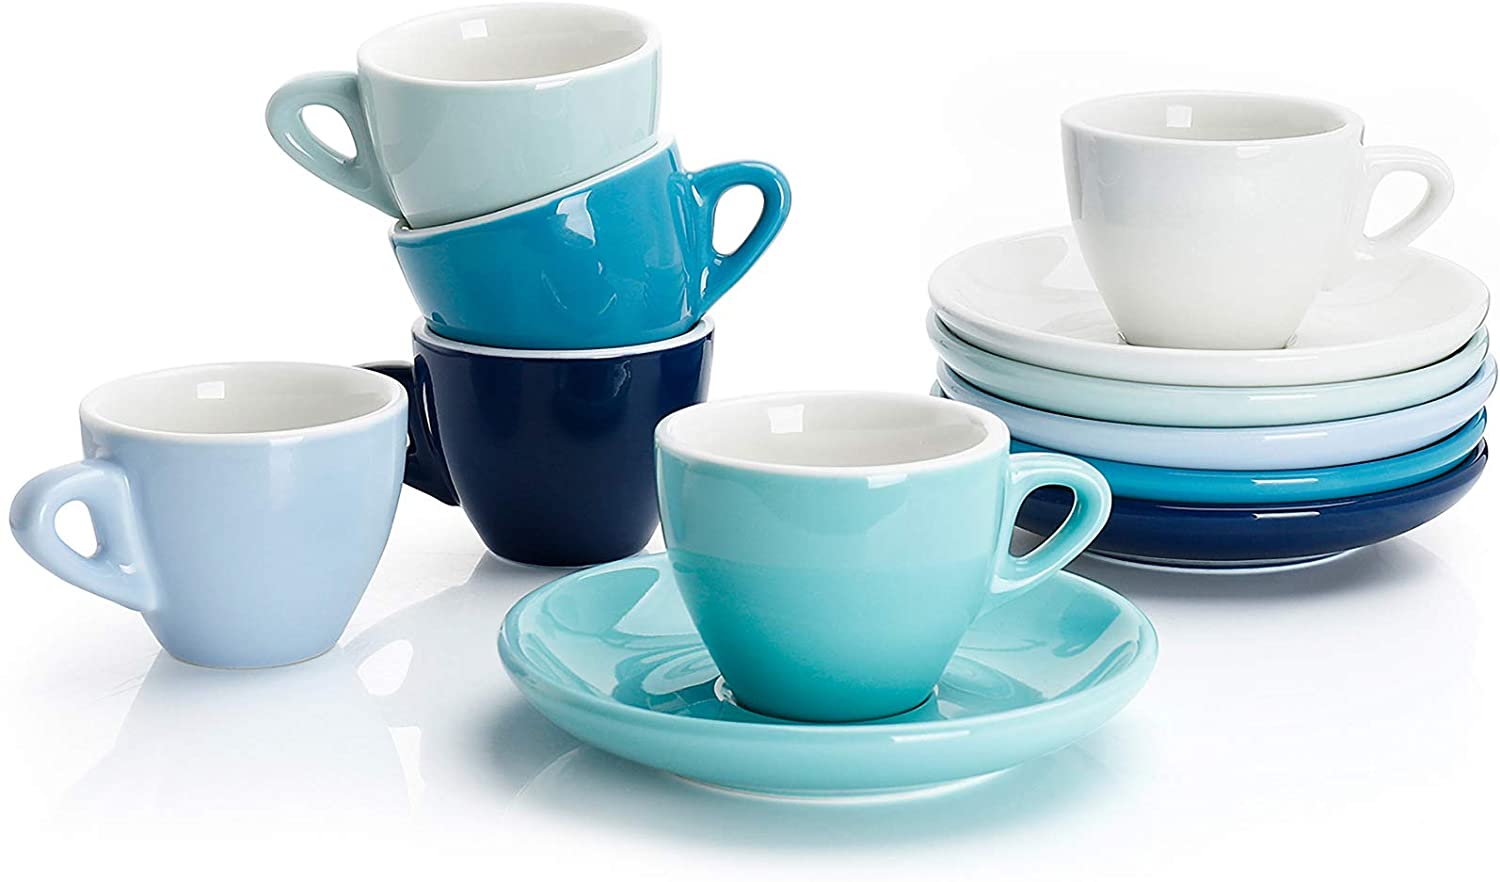 stacks of different blue colored espresso cups and saucers